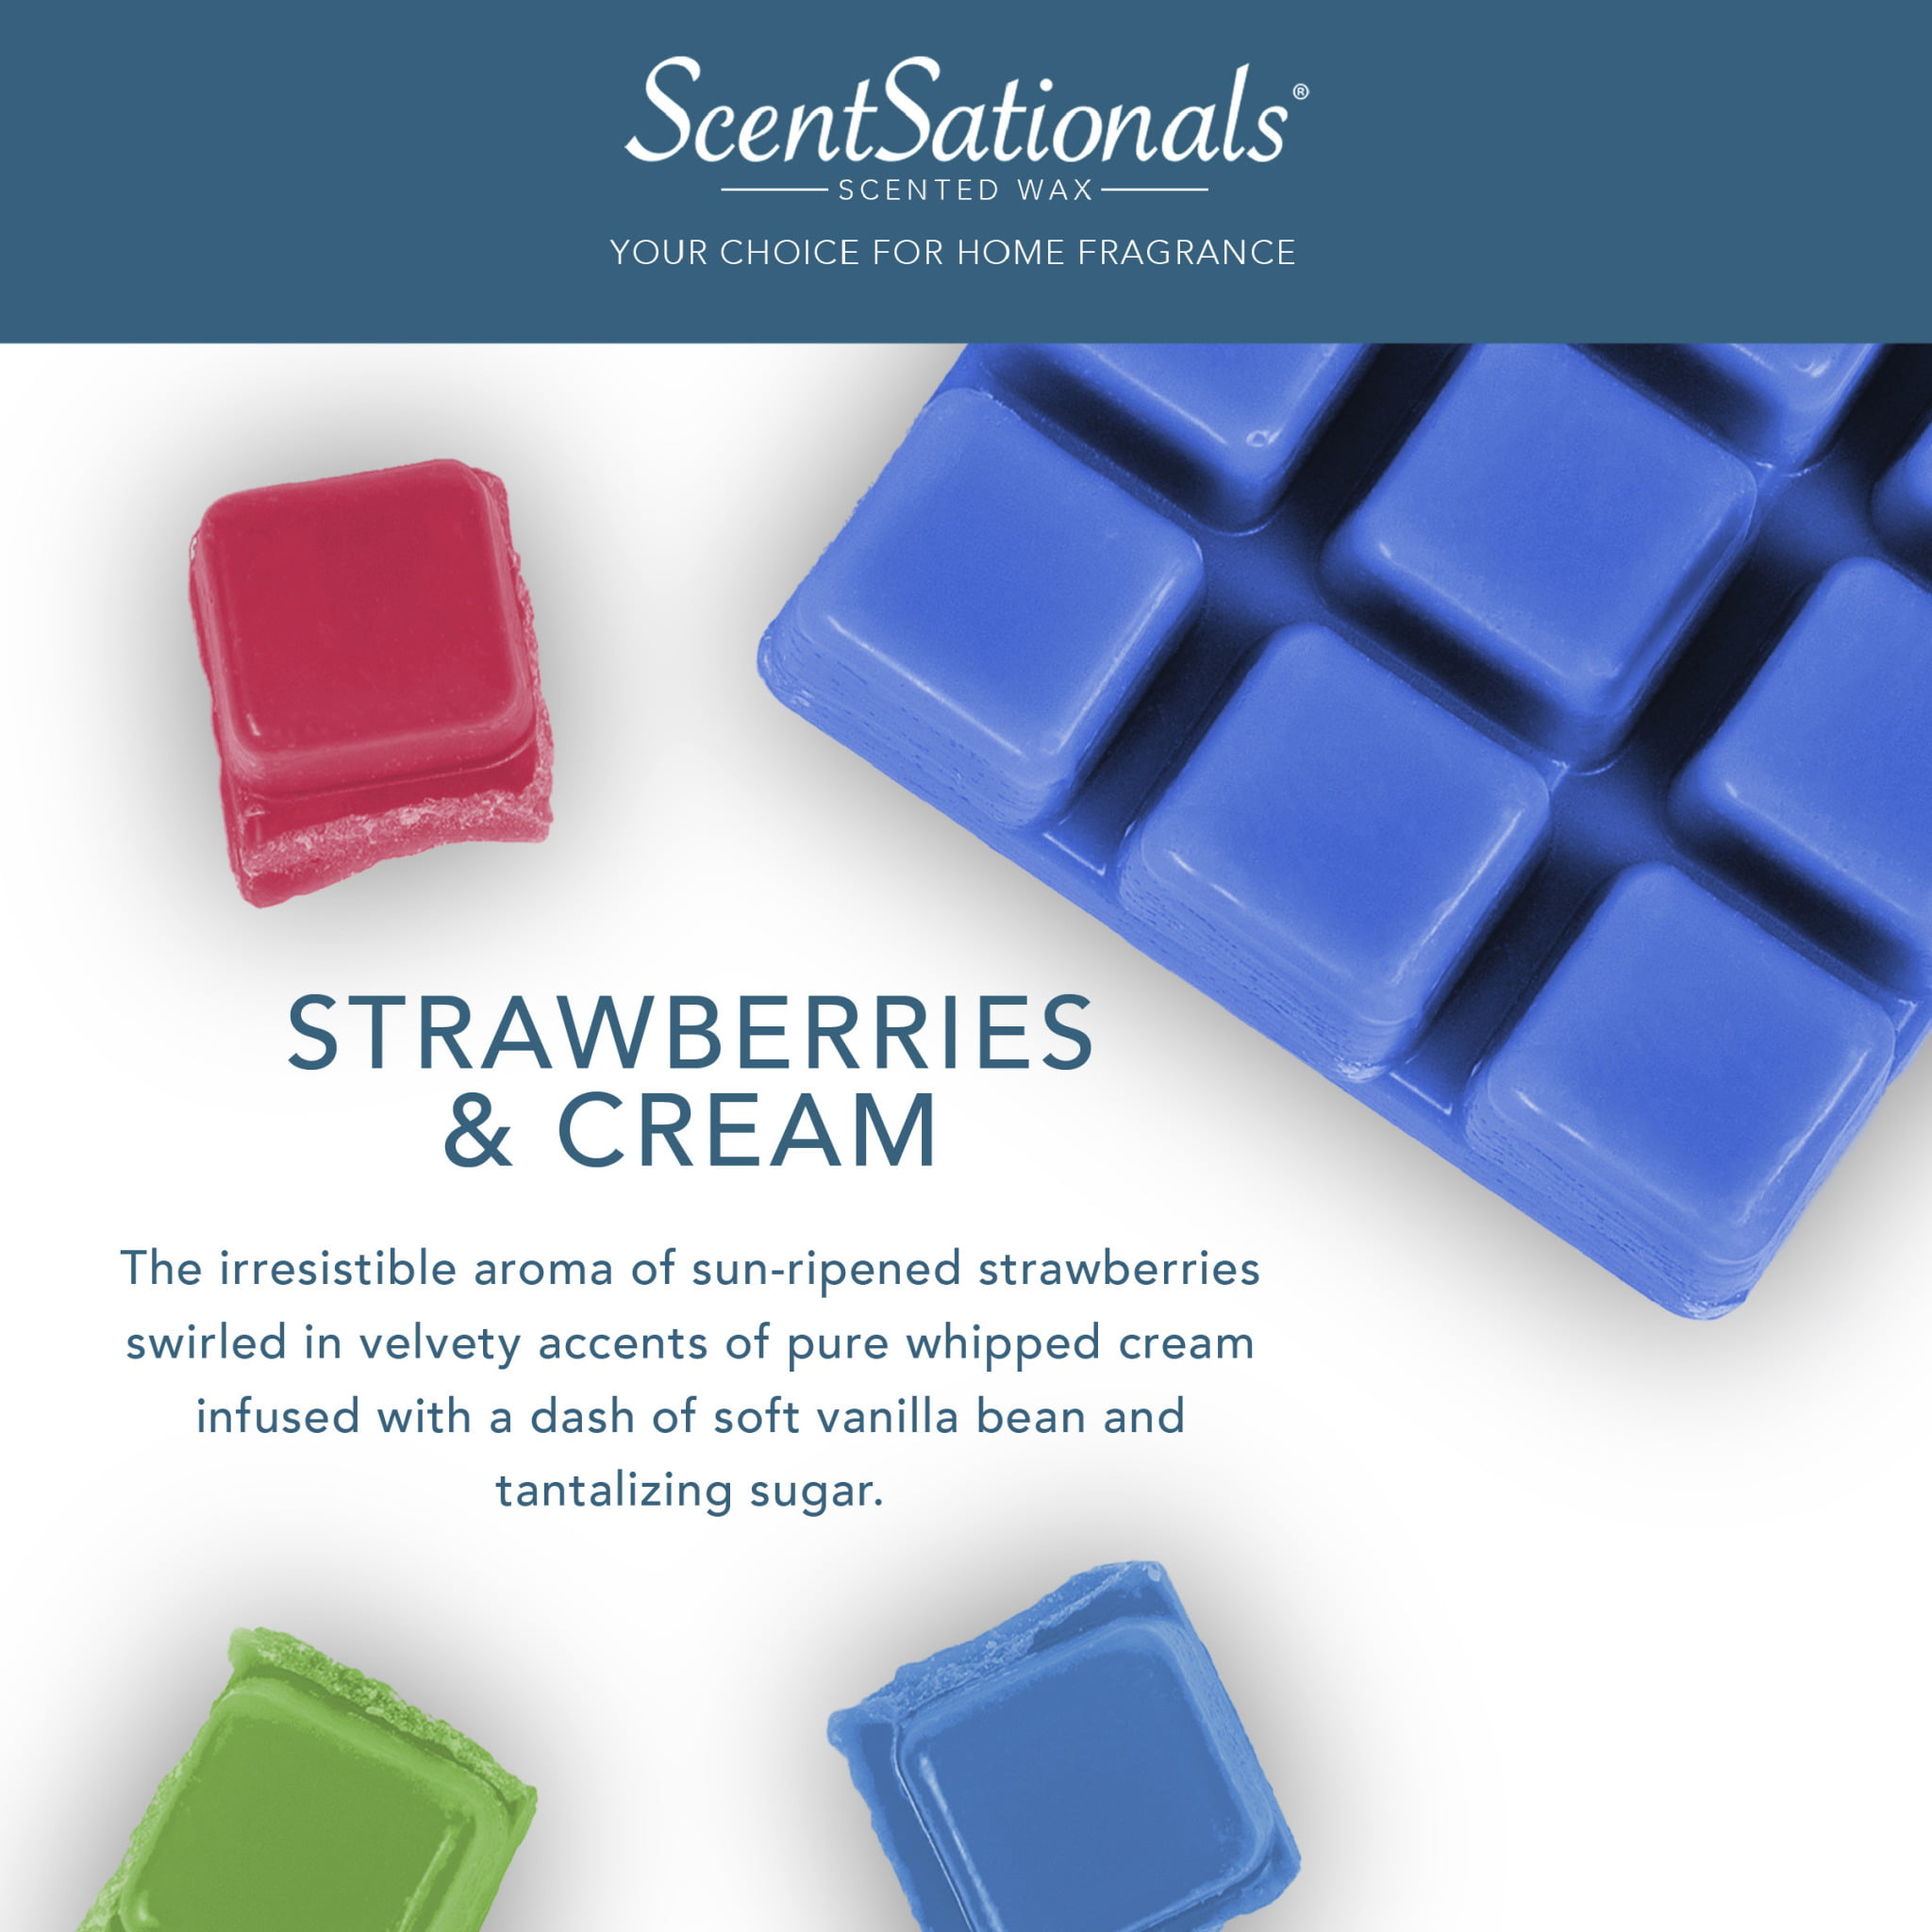  Scentsationals Scented Wax Cubes - Strawberries & Cream - Fragrance  Wax Melts Pack, Electric Home Warmer Tart, Wickless Candle Bar Air  Freshener, Spa Aroma Decor Gift - 2.5 oz: Home & Kitchen